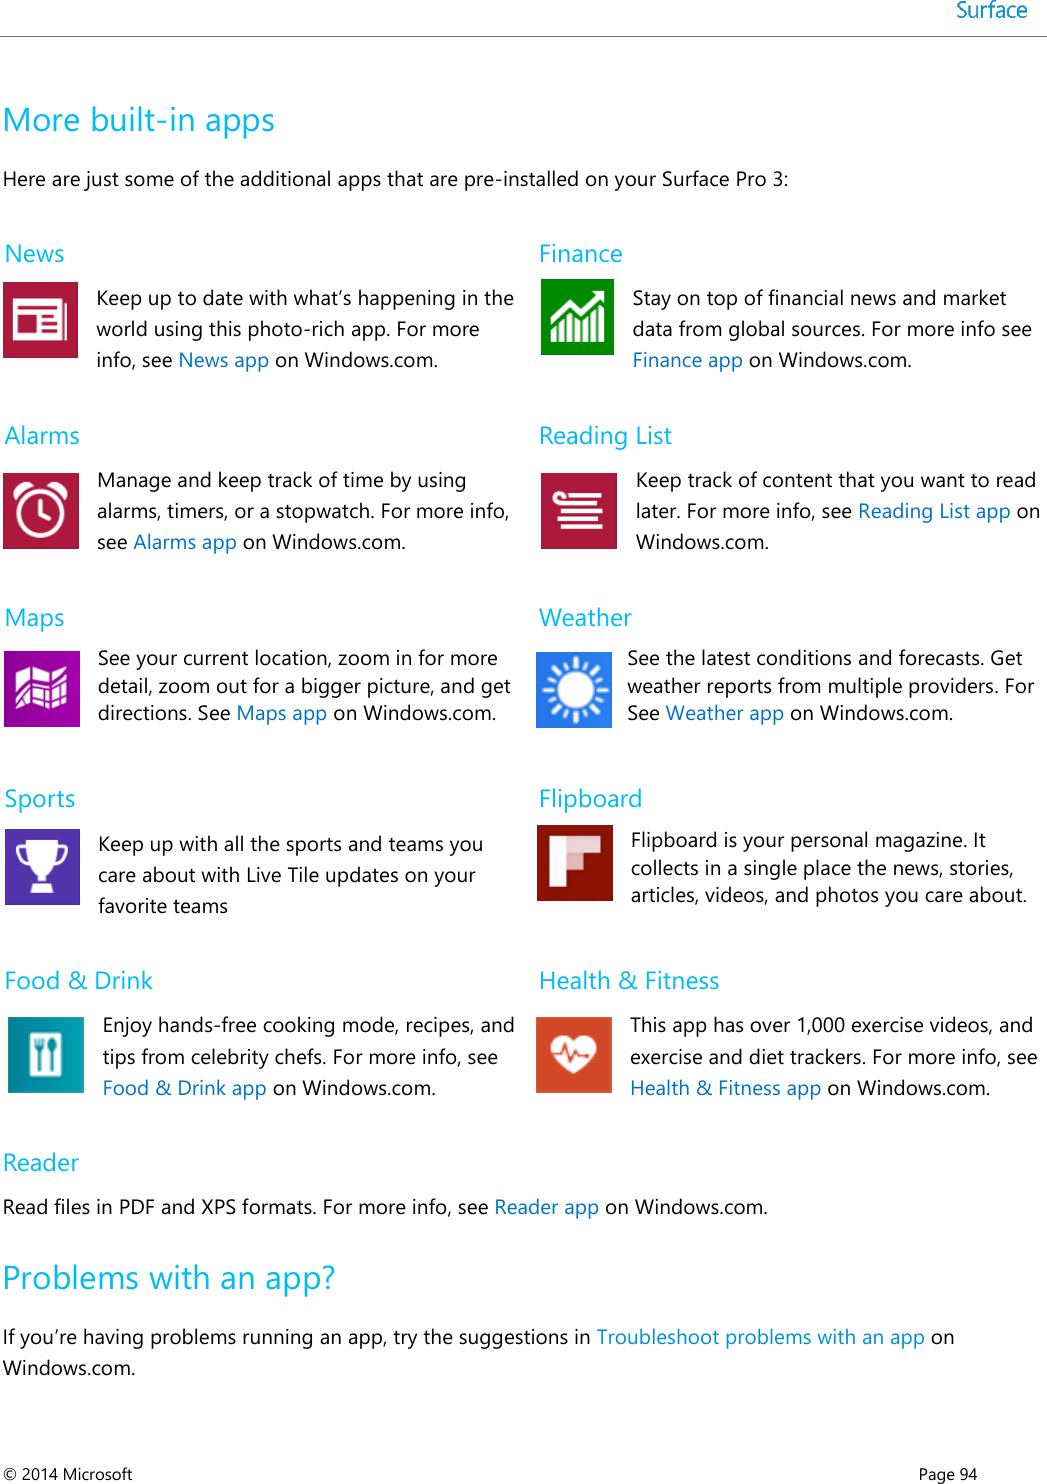  © 2014 Microsoft      Page 94  More built-in apps Here are just some of the additional apps that are pre-installed on your Surface Pro 3: News Keep up to date with what’s happening in the world using this photo-rich app. For more info, see News app on Windows.com. Finance Stay on top of financial news and market data from global sources. For more info see Finance app on Windows.com. Alarms Manage and keep track of time by using alarms, timers, or a stopwatch. For more info, see Alarms app on Windows.com.  Reading List Keep track of content that you want to read later. For more info, see Reading List app on Windows.com.  Maps See your current location, zoom in for more detail, zoom out for a bigger picture, and get directions. See Maps app on Windows.com. Weather See the latest conditions and forecasts. Get weather reports from multiple providers. For See Weather app on Windows.com. Sports Keep up with all the sports and teams you care about with Live Tile updates on your favorite teams Flipboard Flipboard is your personal magazine. It collects in a single place the news, stories, articles, videos, and photos you care about. Food &amp; Drink Enjoy hands-free cooking mode, recipes, and tips from celebrity chefs. For more info, see Food &amp; Drink app on Windows.com. Health &amp; Fitness This app has over 1,000 exercise videos, and exercise and diet trackers. For more info, see Health &amp; Fitness app on Windows.com. Reader Read files in PDF and XPS formats. For more info, see Reader app on Windows.com. Problems with an app? If you’re having problems running an app, try the suggestions in Troubleshoot problems with an app on Windows.com.  